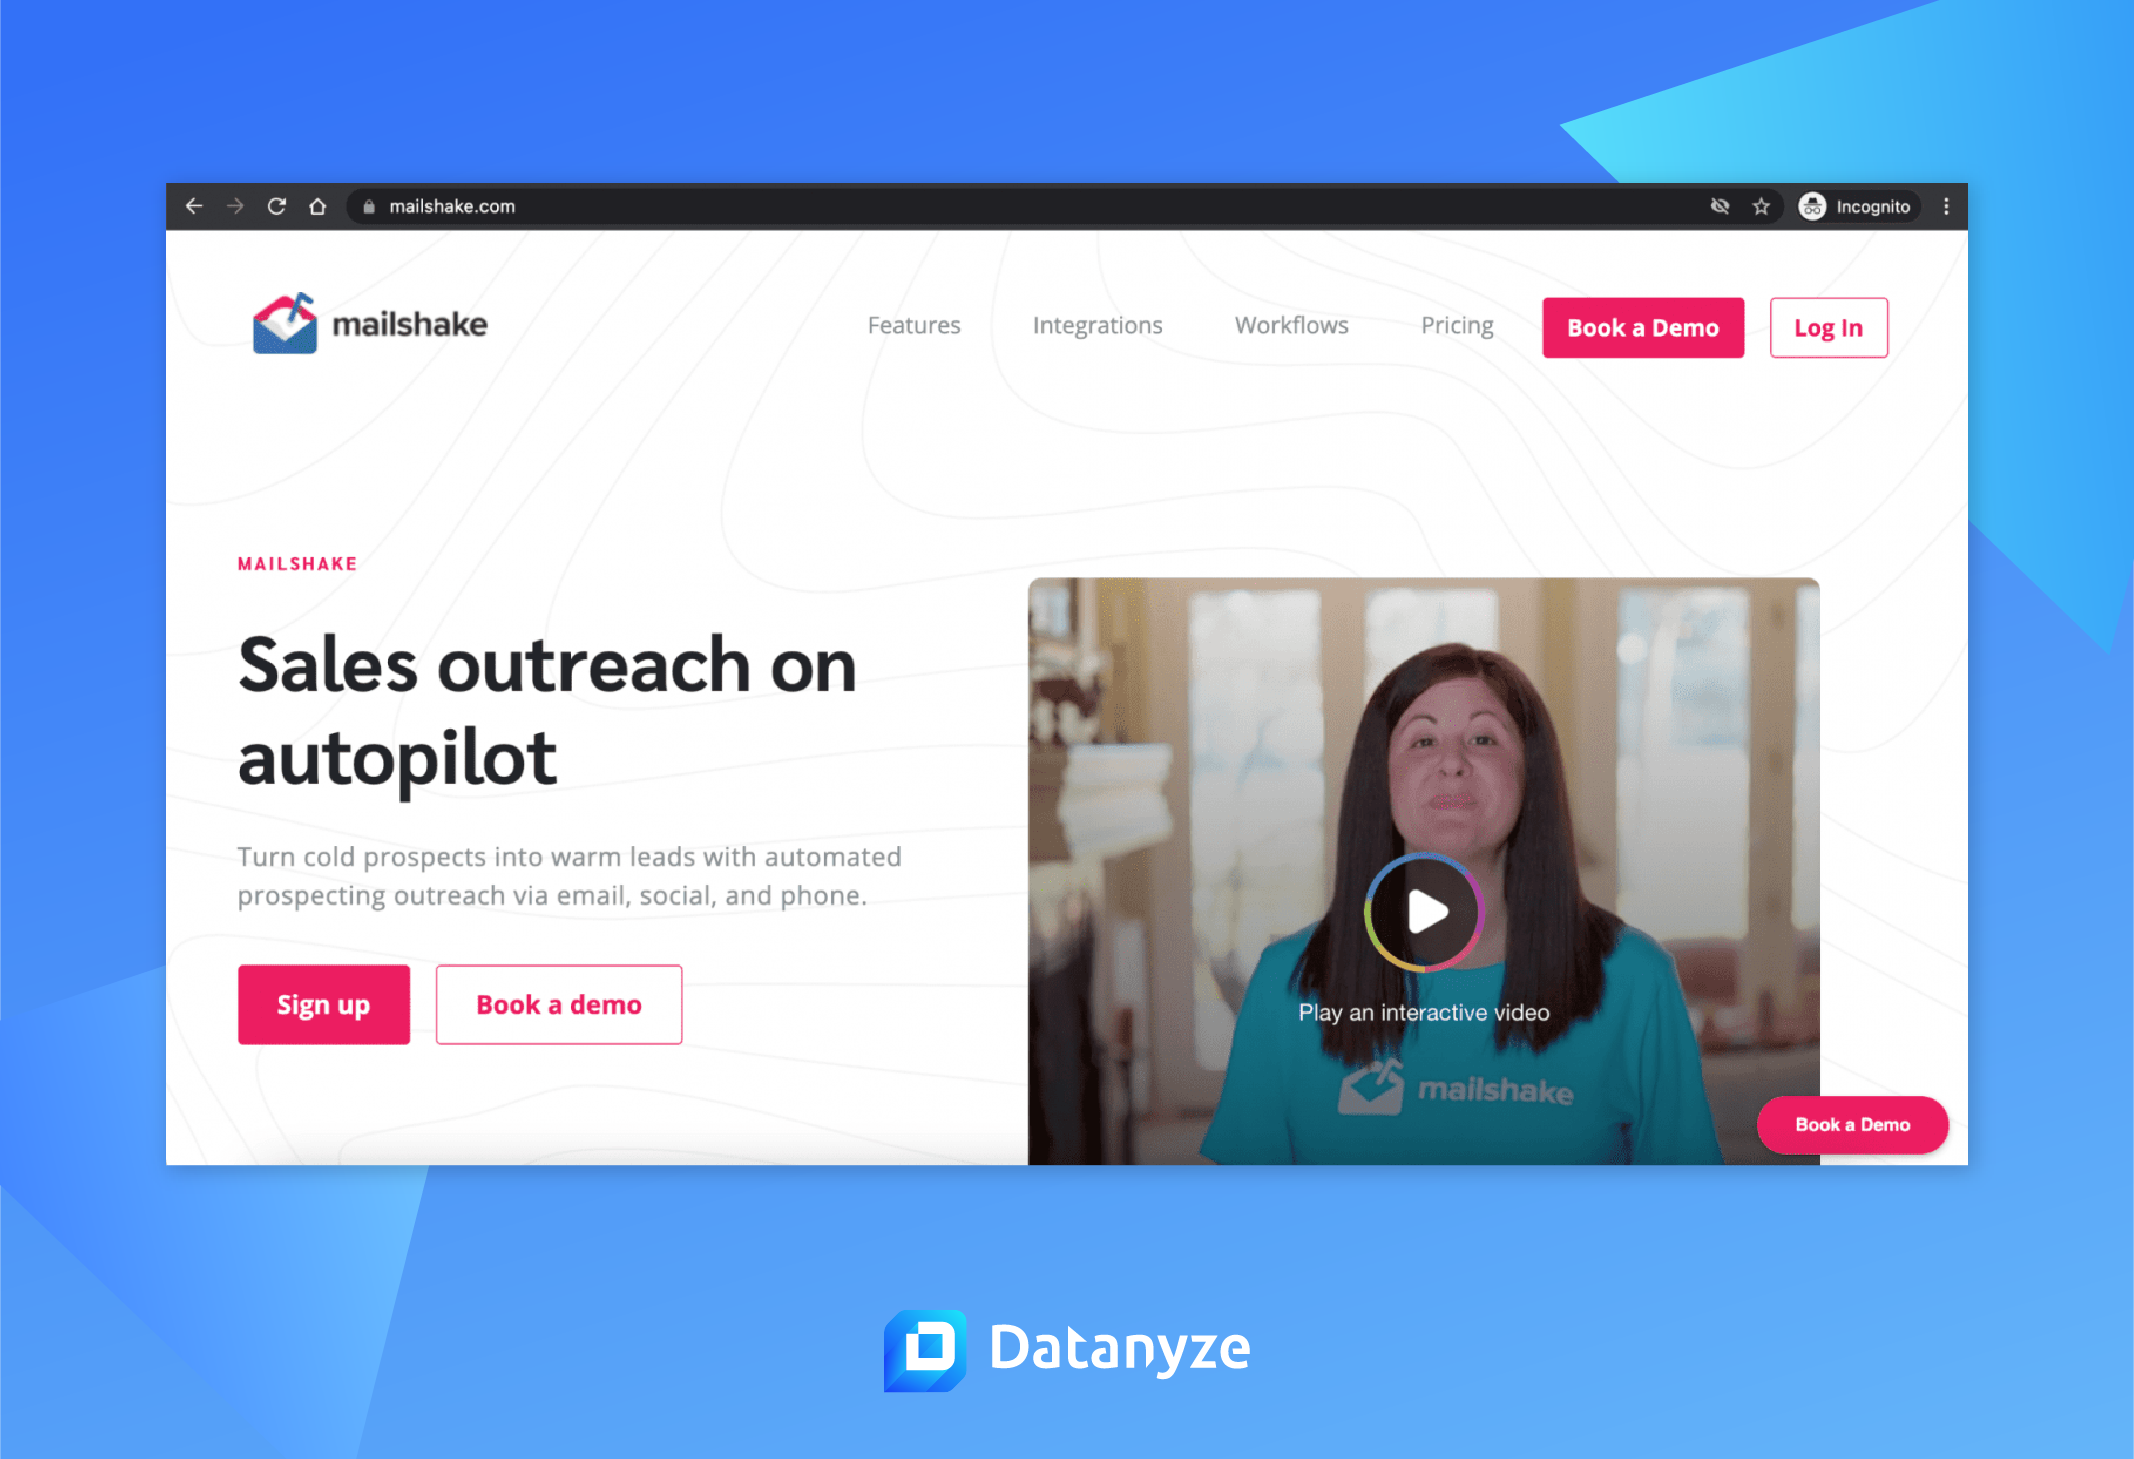 How Does Mailshake Automate Sales Outreach?